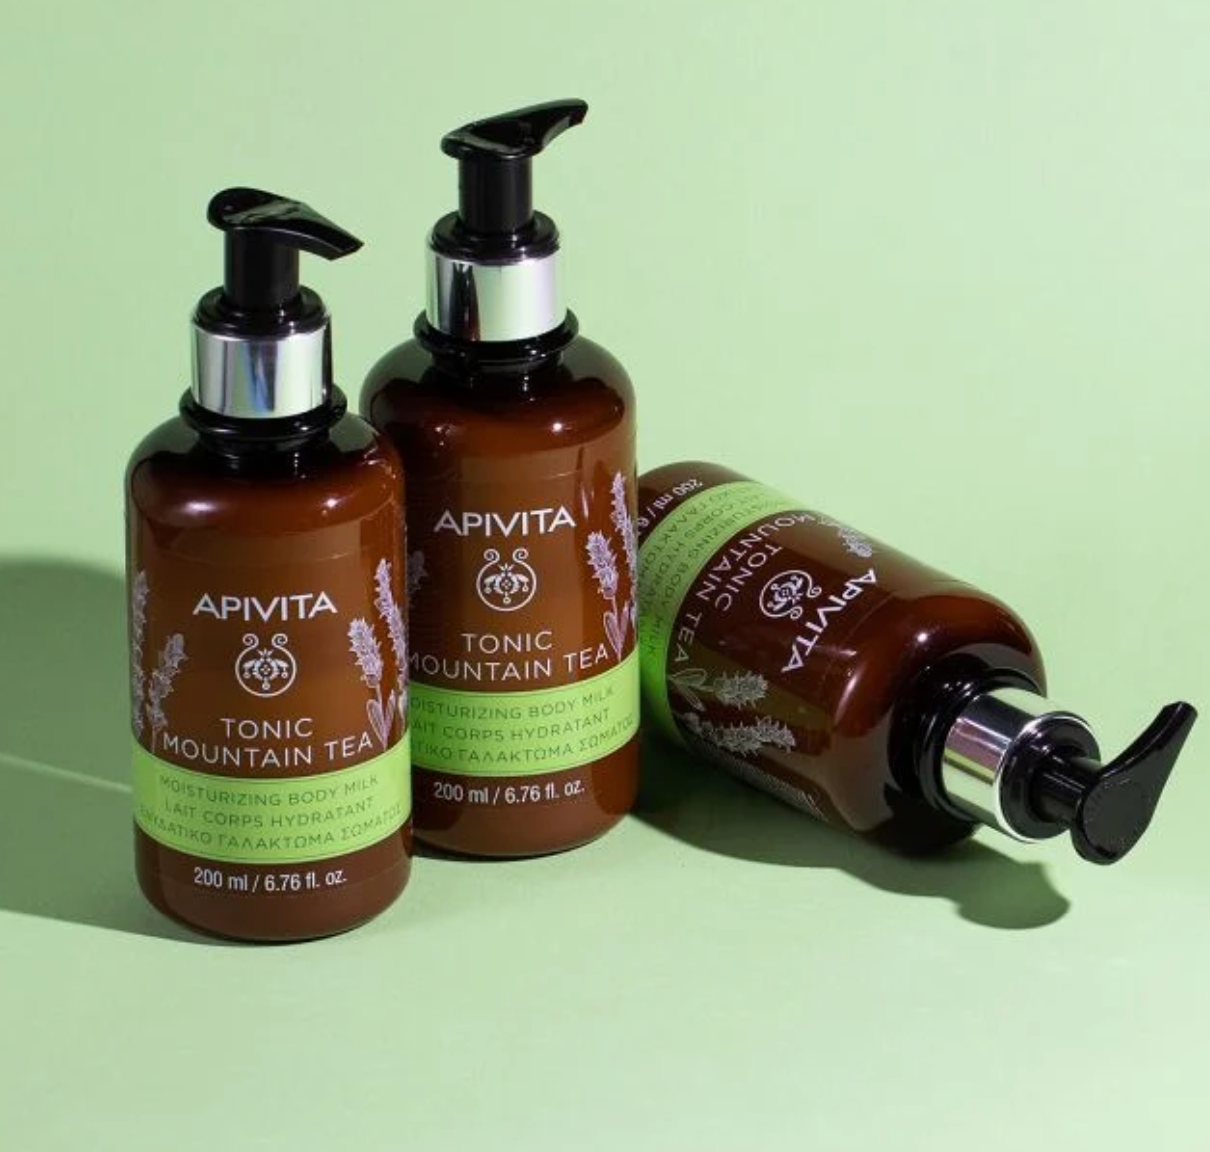 Apivita Mountain Tea moisturising body milk is absorbed quickly, its texture is excellent while its aromatherapy-inspired scent of bergamot and eucalyptus essential oils provide an invigorating effect. 